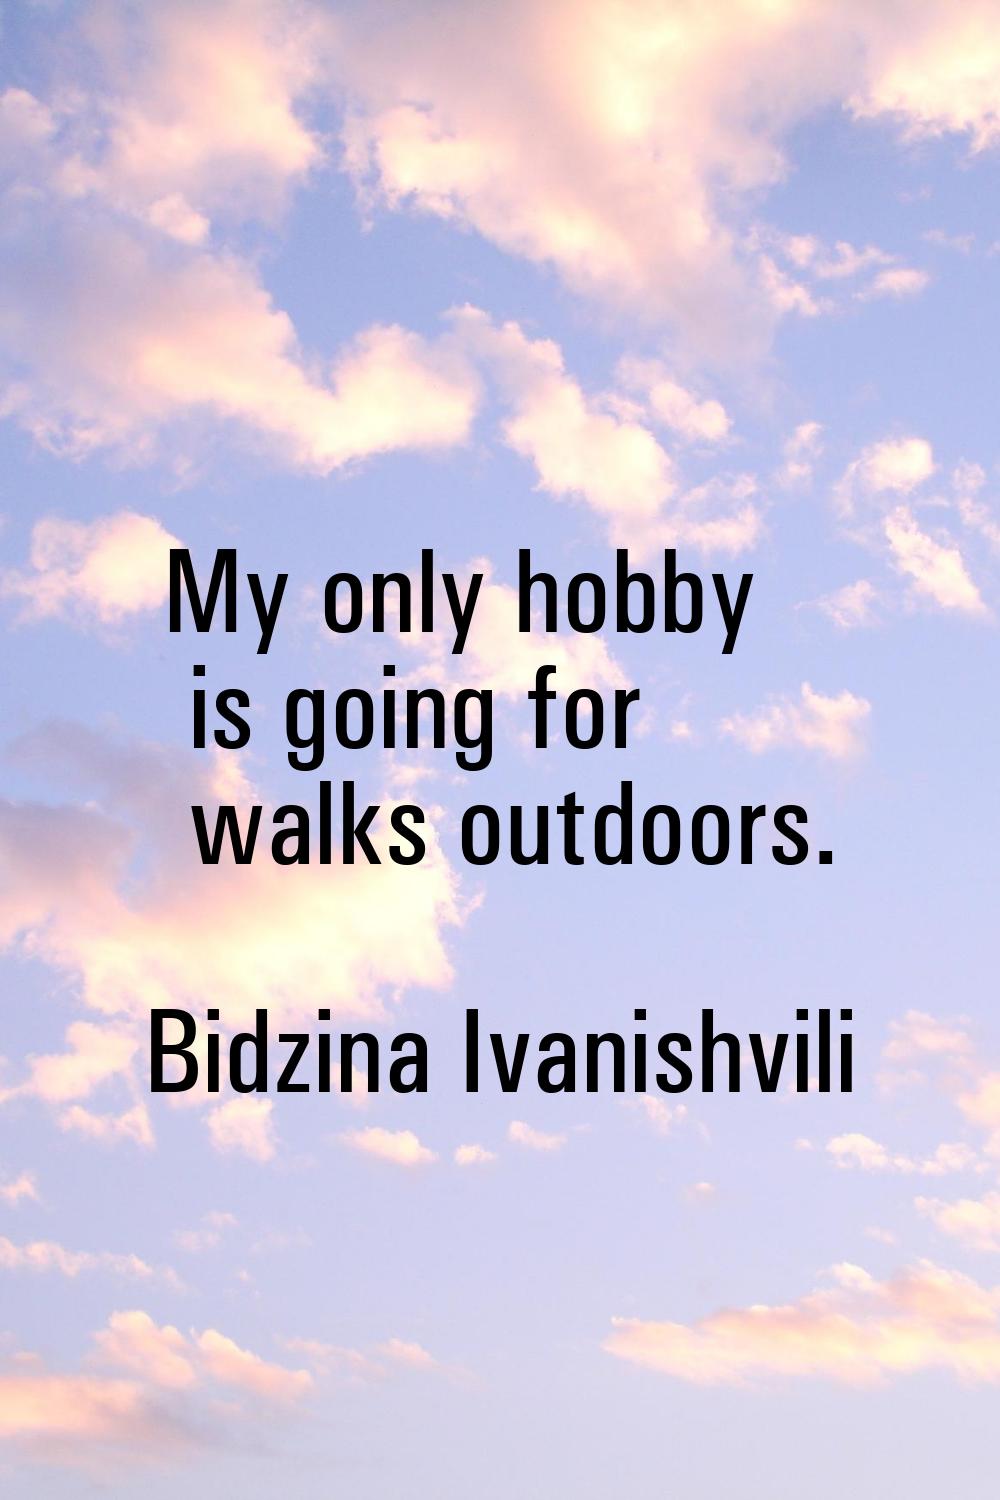 My only hobby is going for walks outdoors.